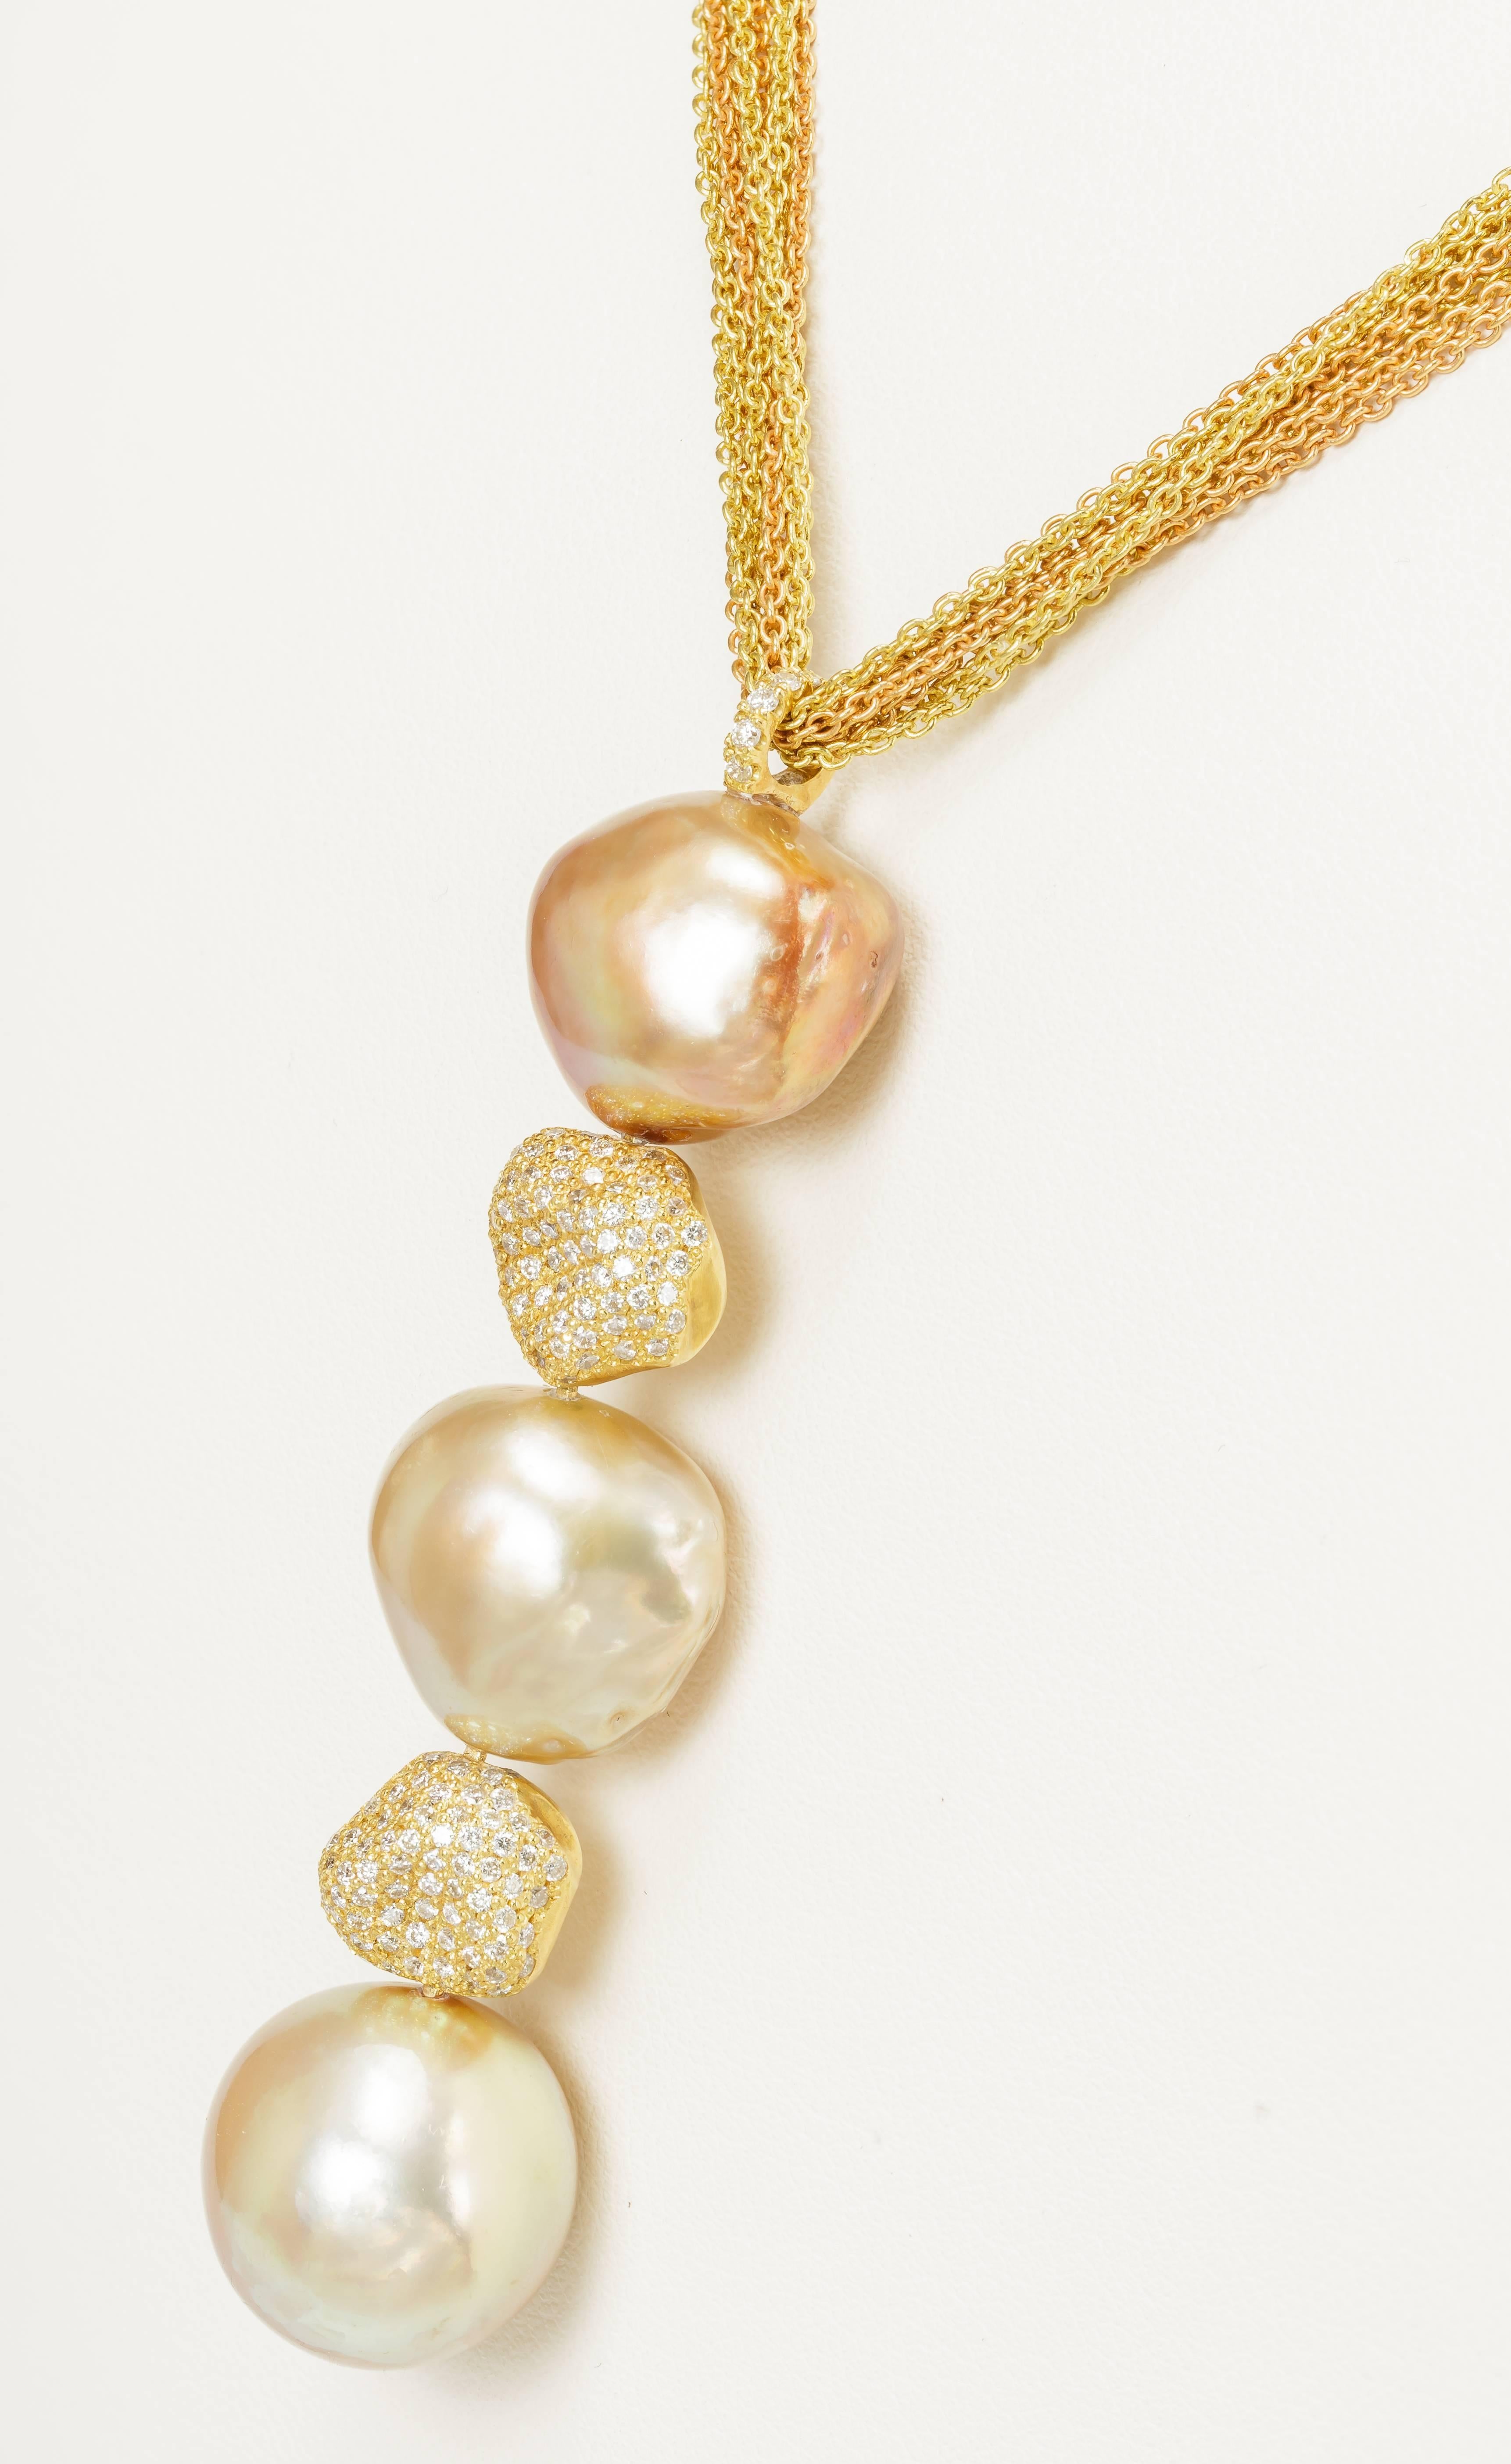 Round Cut Yvel South Sea Baroque Pearl and Diamond Necklace 18 Karat Yellow and Rose Gold  For Sale